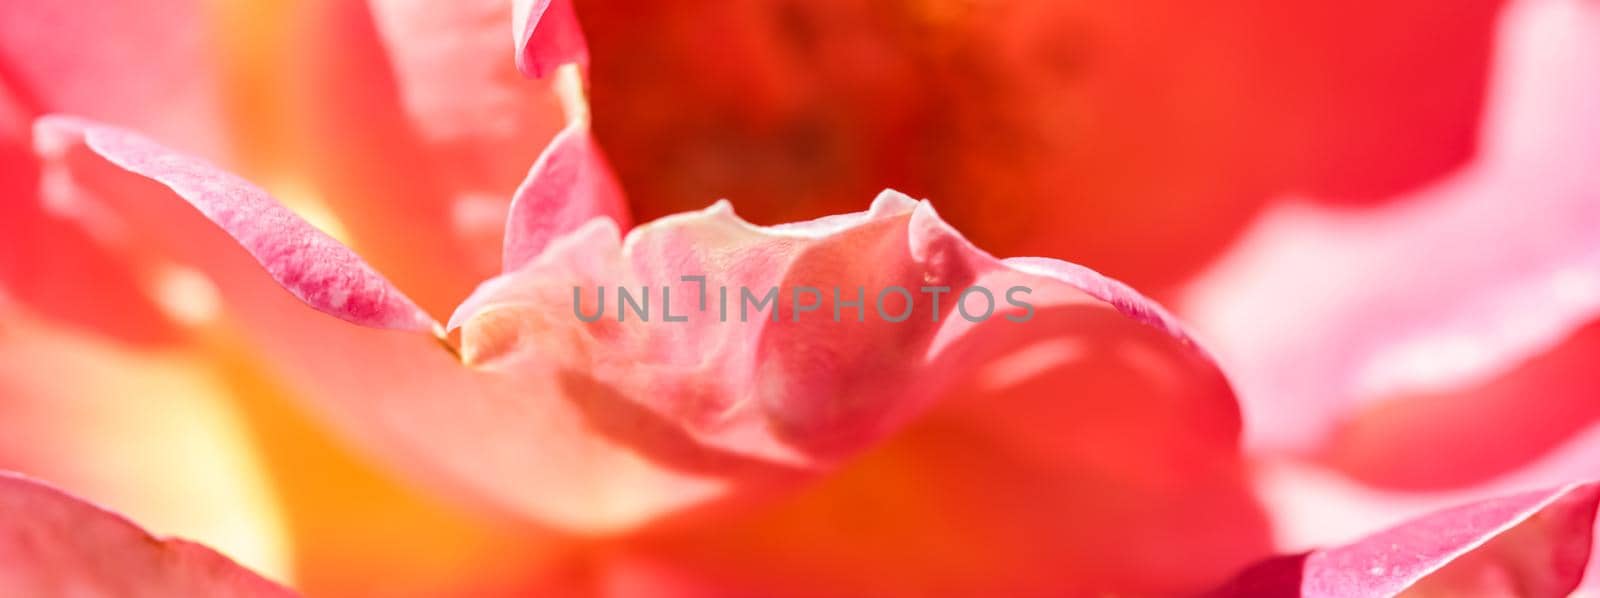 Botanical concept, invitation card - Soft focus, abstract floral background, red yellow rose flower. Macro flowers backdrop for holiday brand design